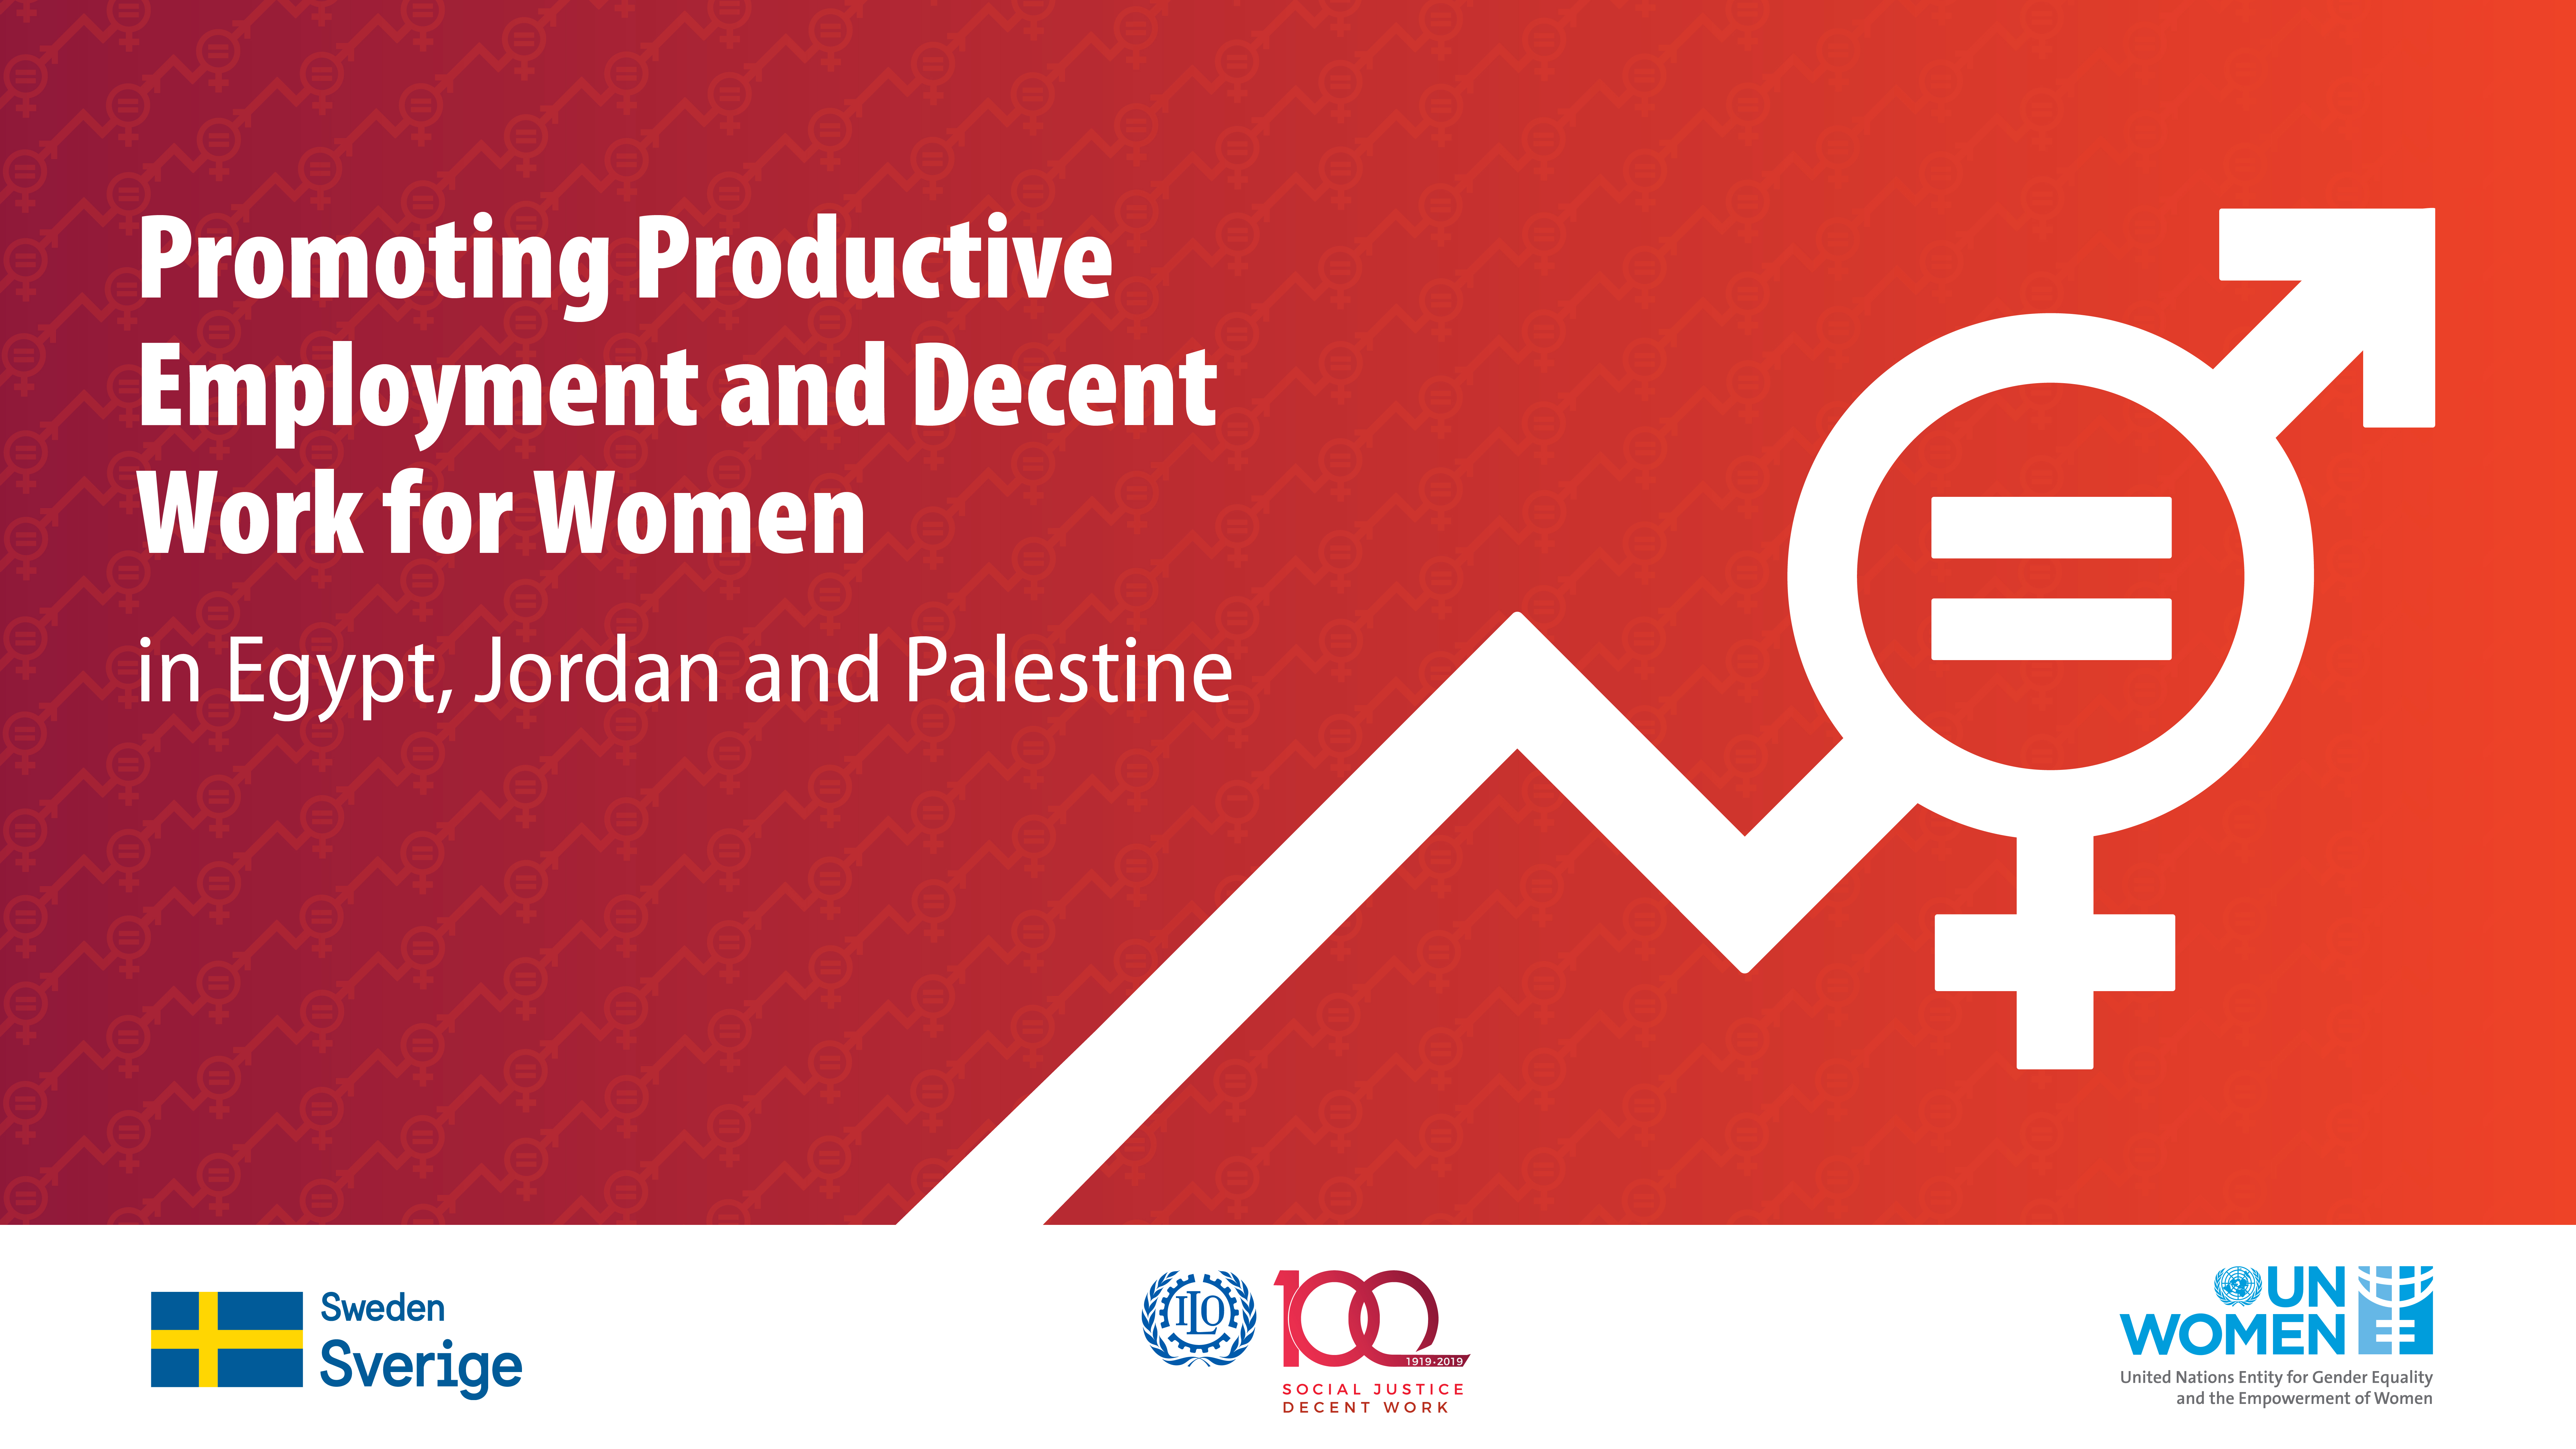 Promoting Productive Employment and Decent Work for Women in Egypt, Jordan, and Palestine (Work4Women) UN Women pic image